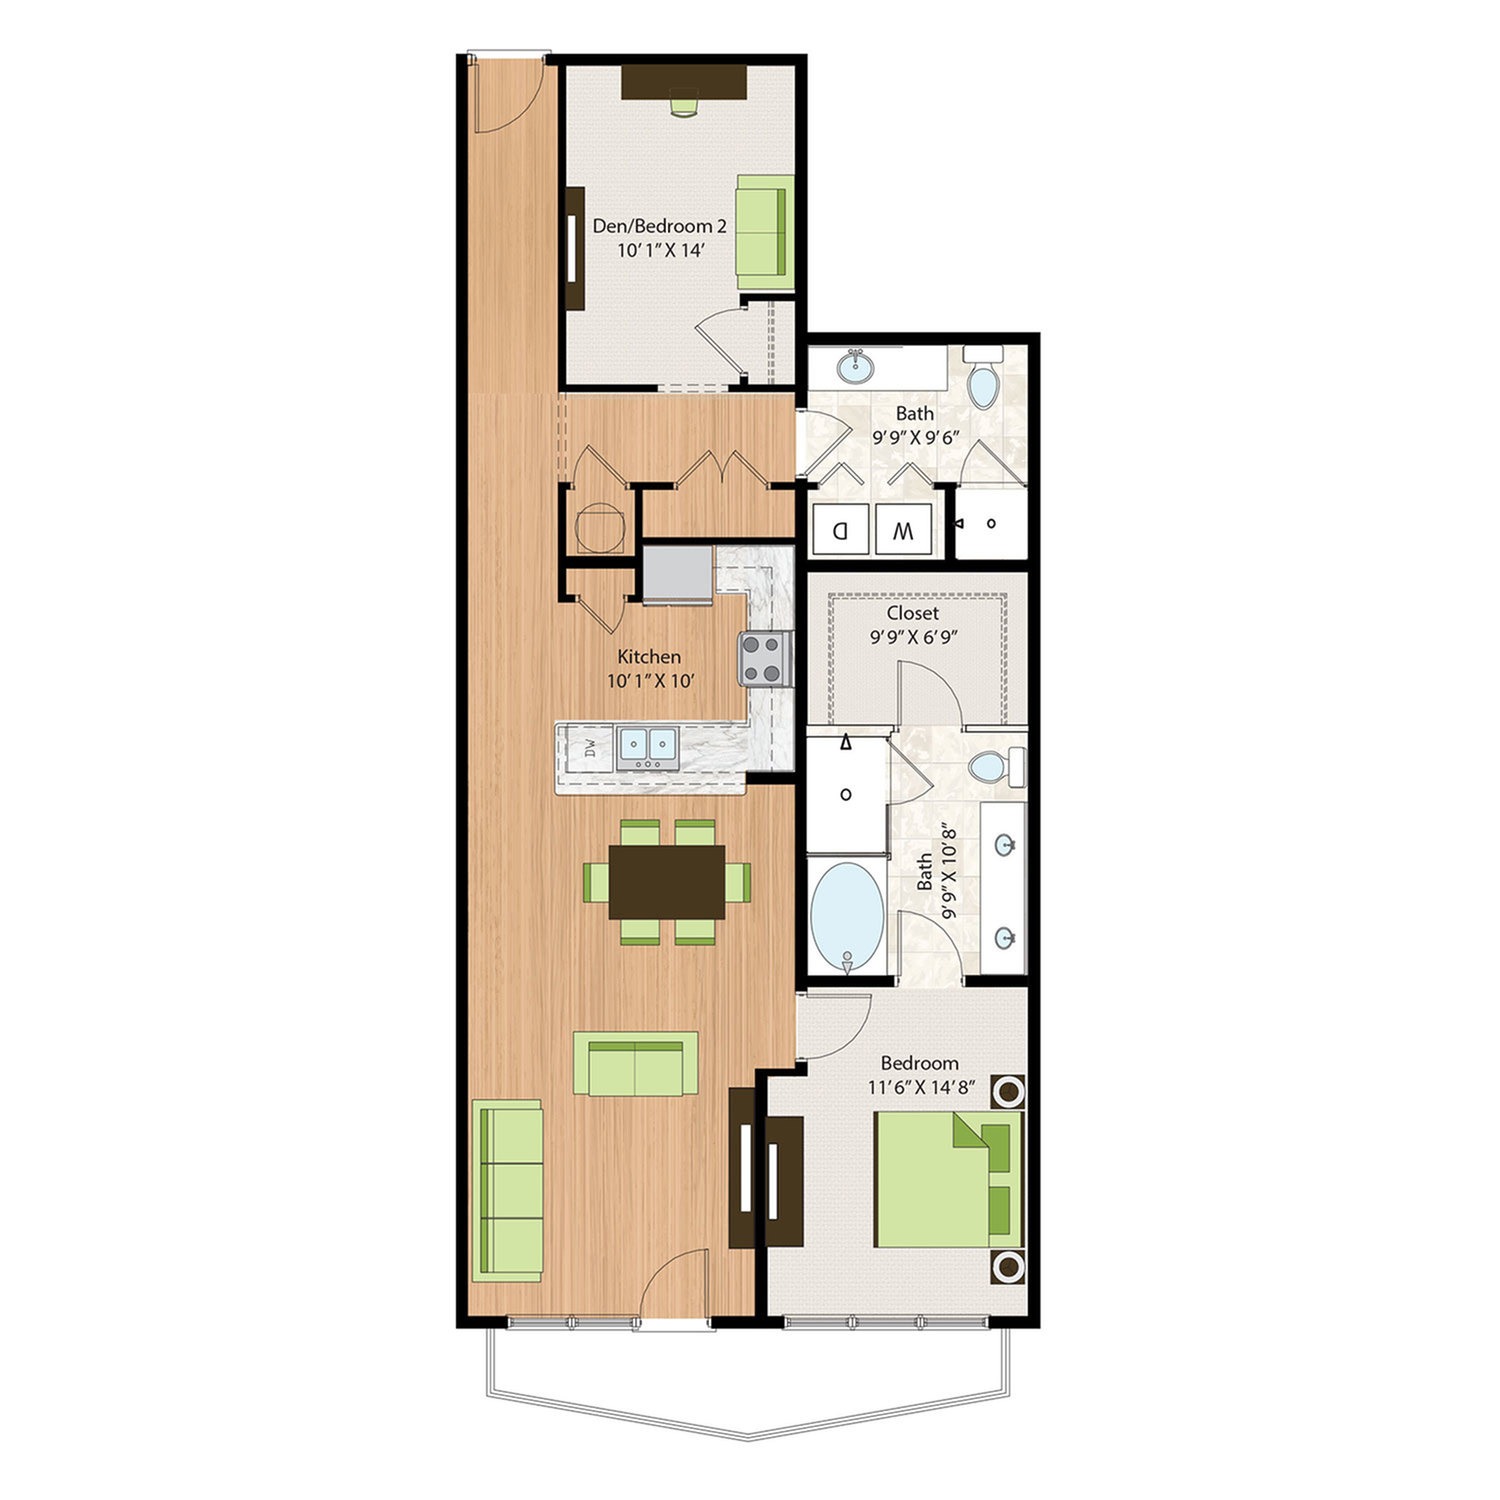 One Bedroom Two Bath with Den (1287 SF)